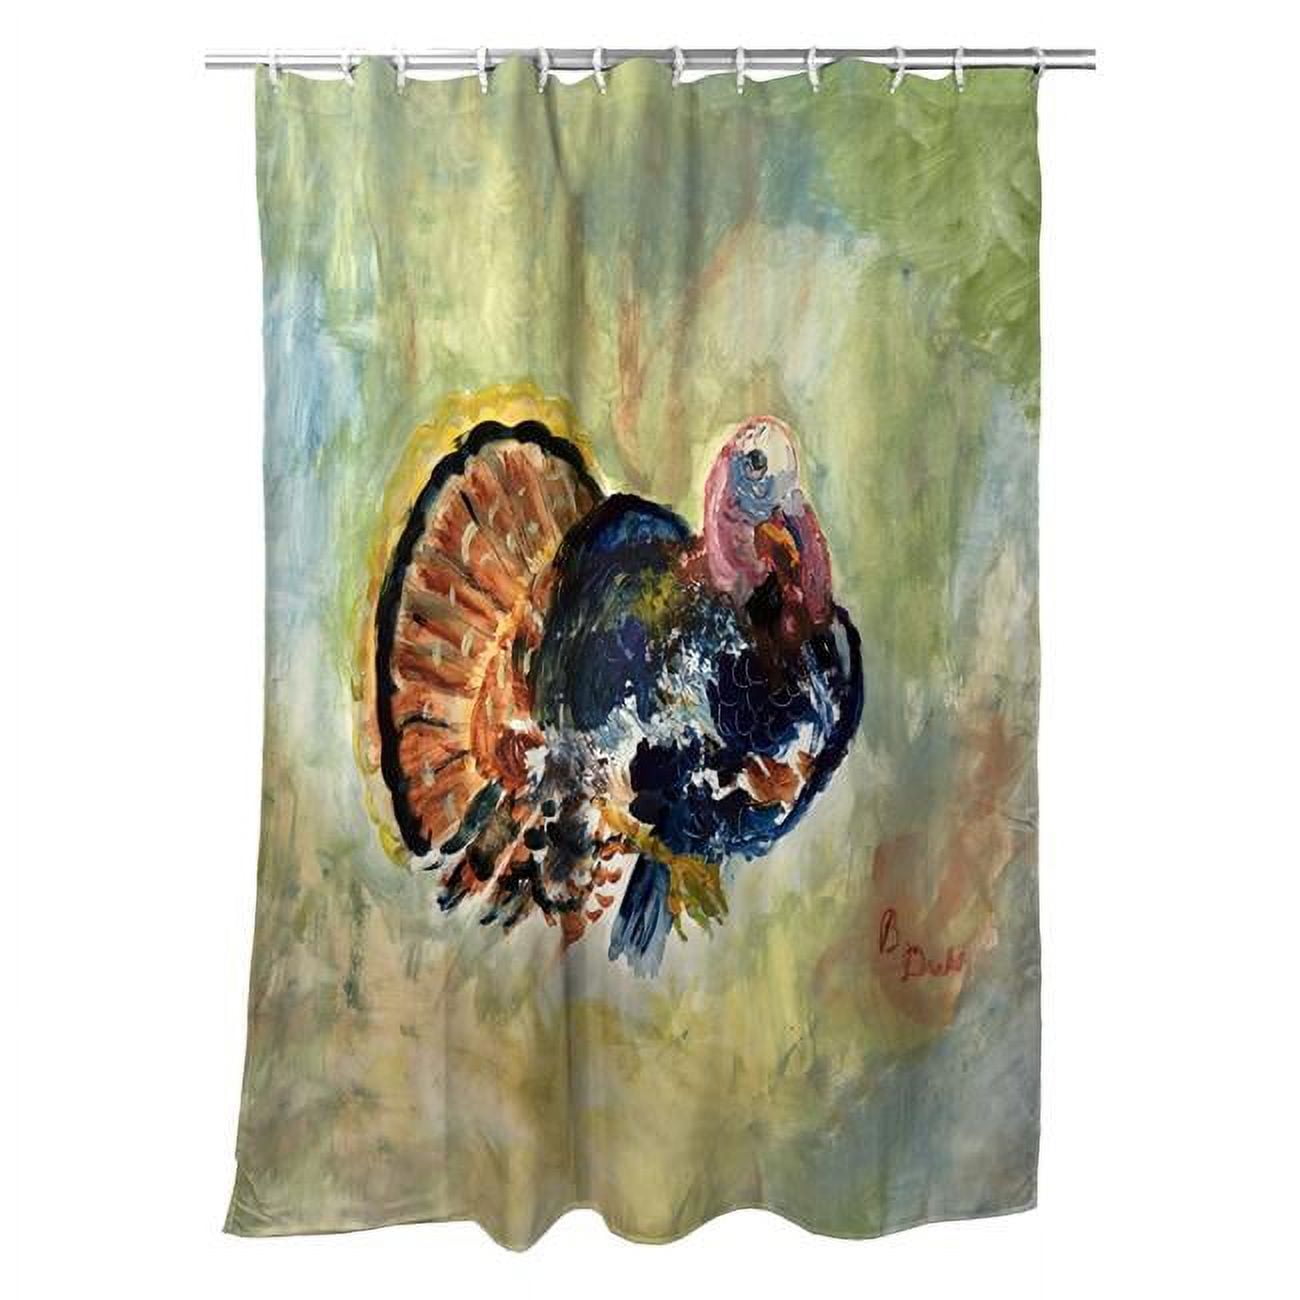 Picture of Betsydrake SH1165 71 x 74 in. Colorful Turkey Shower Curtain